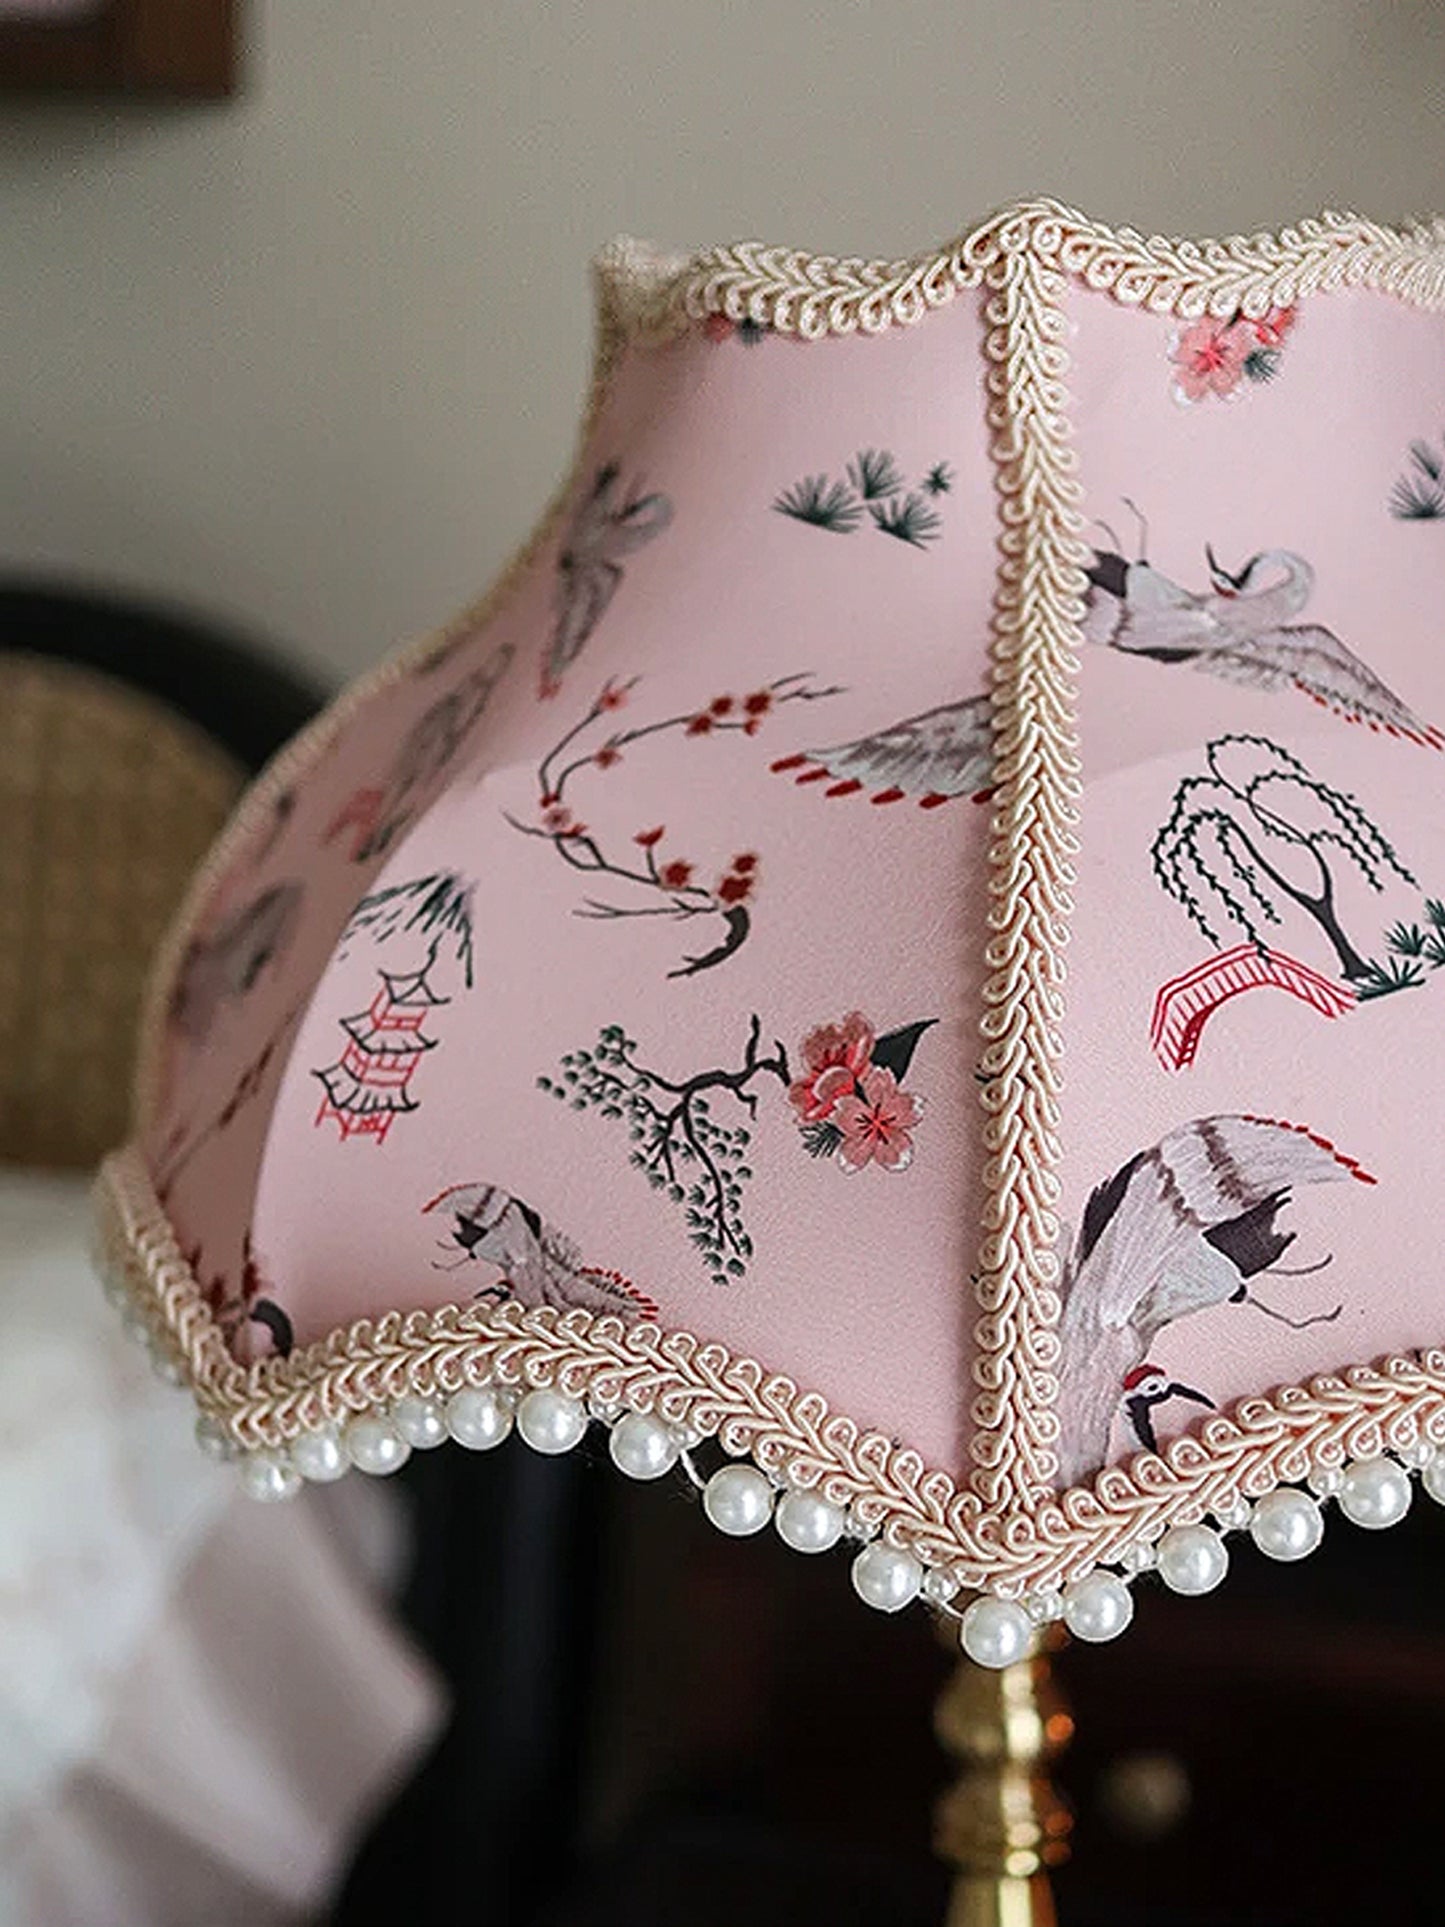 French Retro Pink Table Lamp